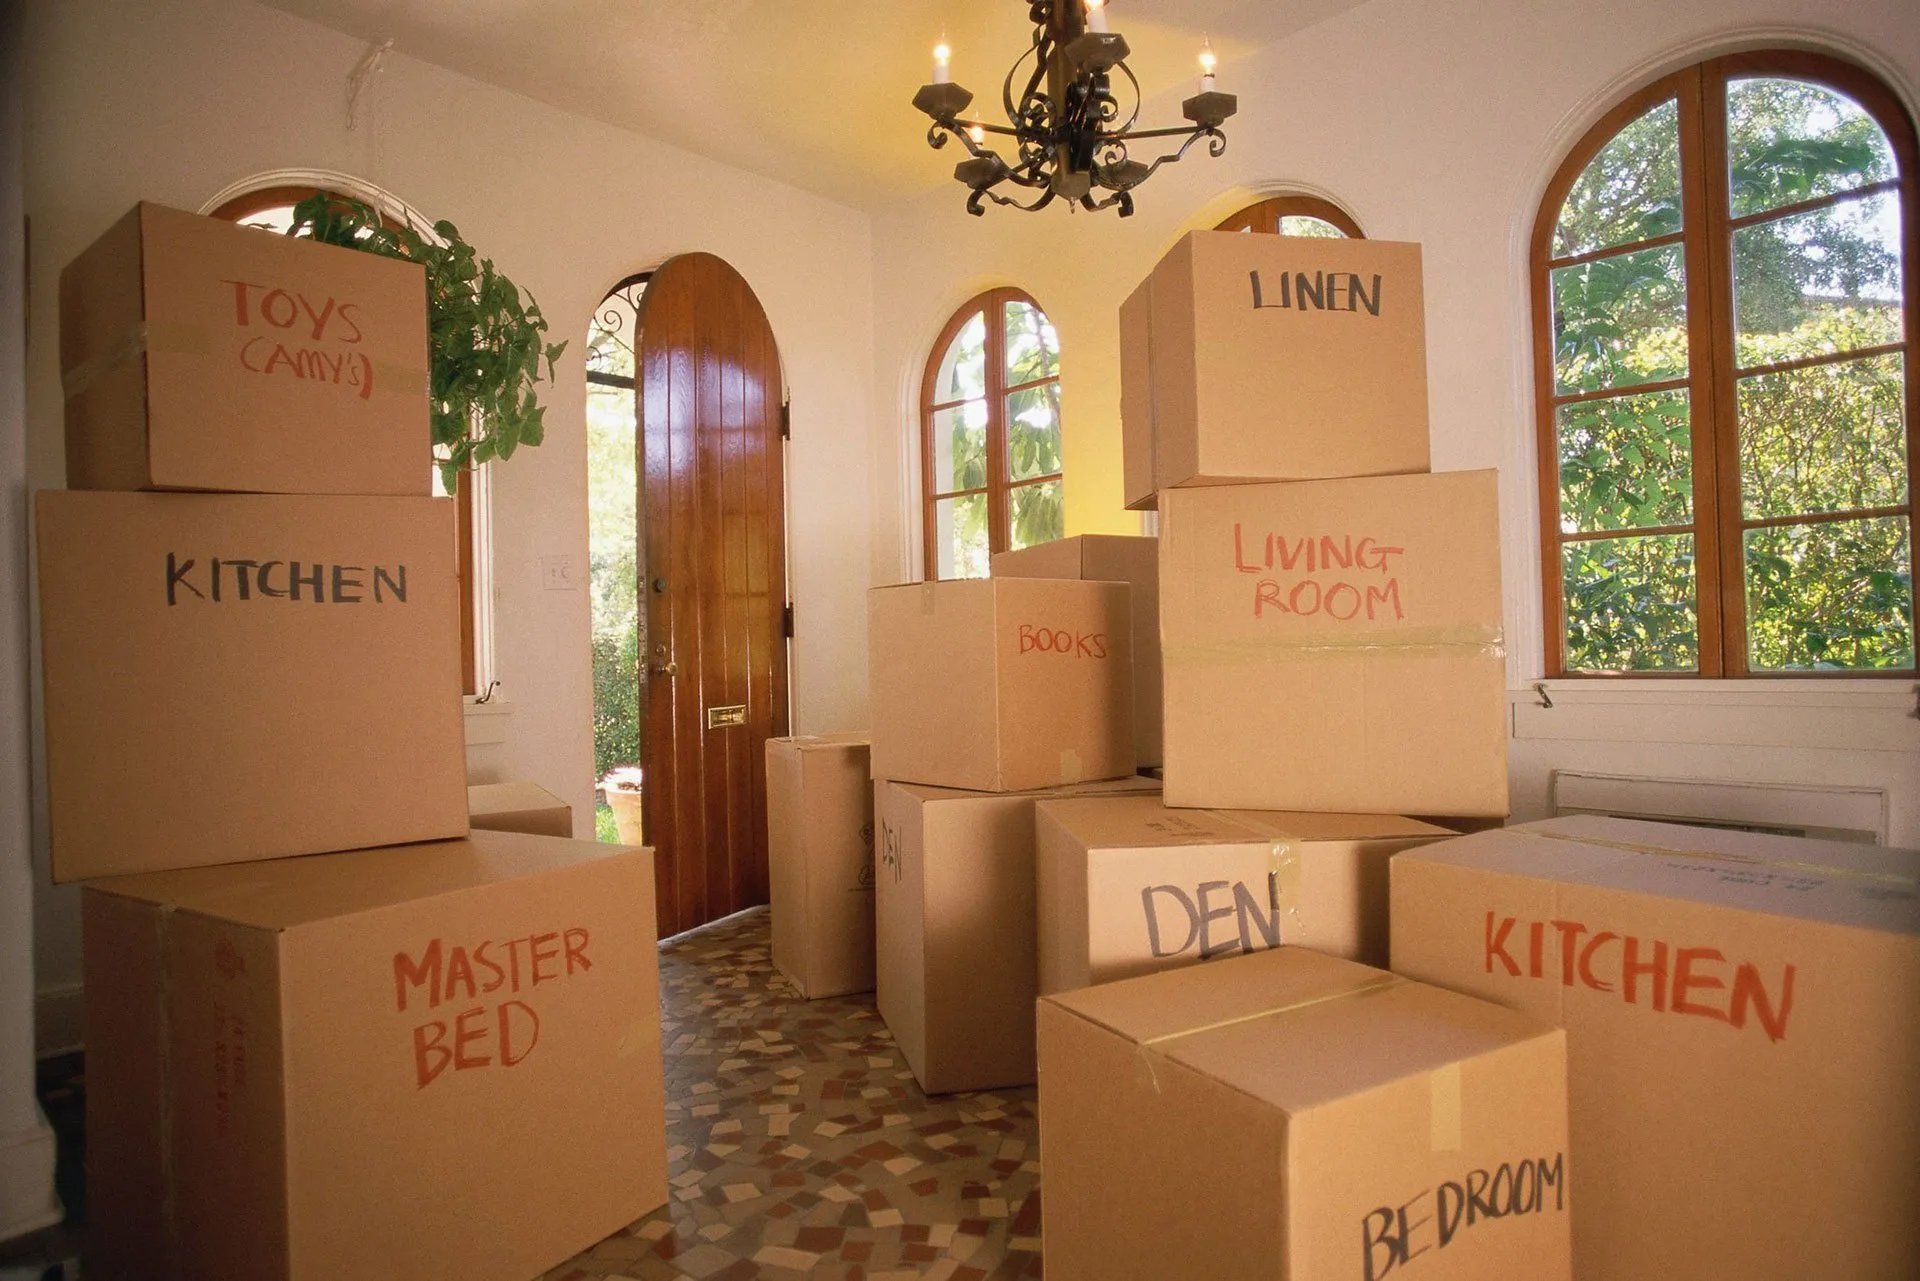 Tips on How to Make the Moving Process Easier